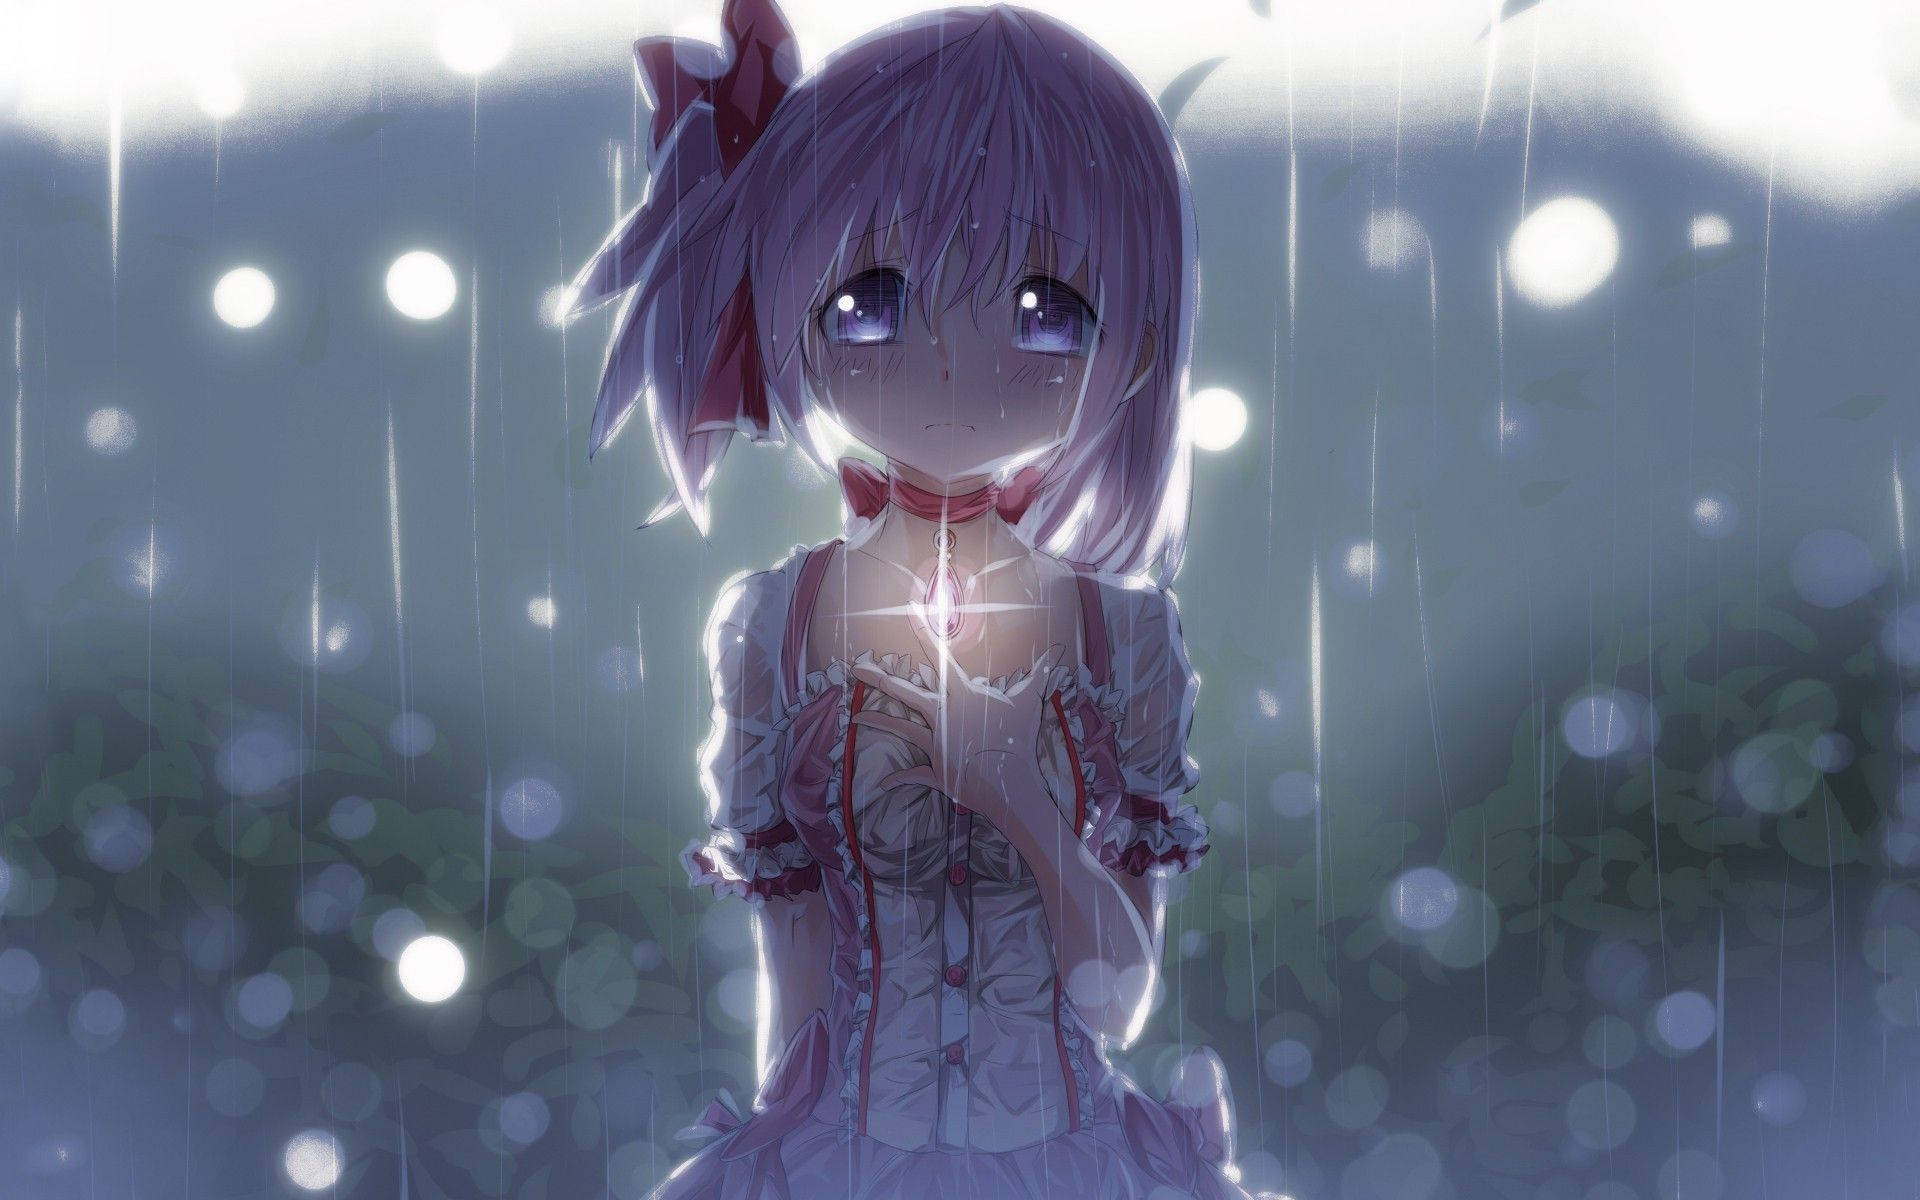 A Girl With A Heavy Heart Sparkling In The Night. Background